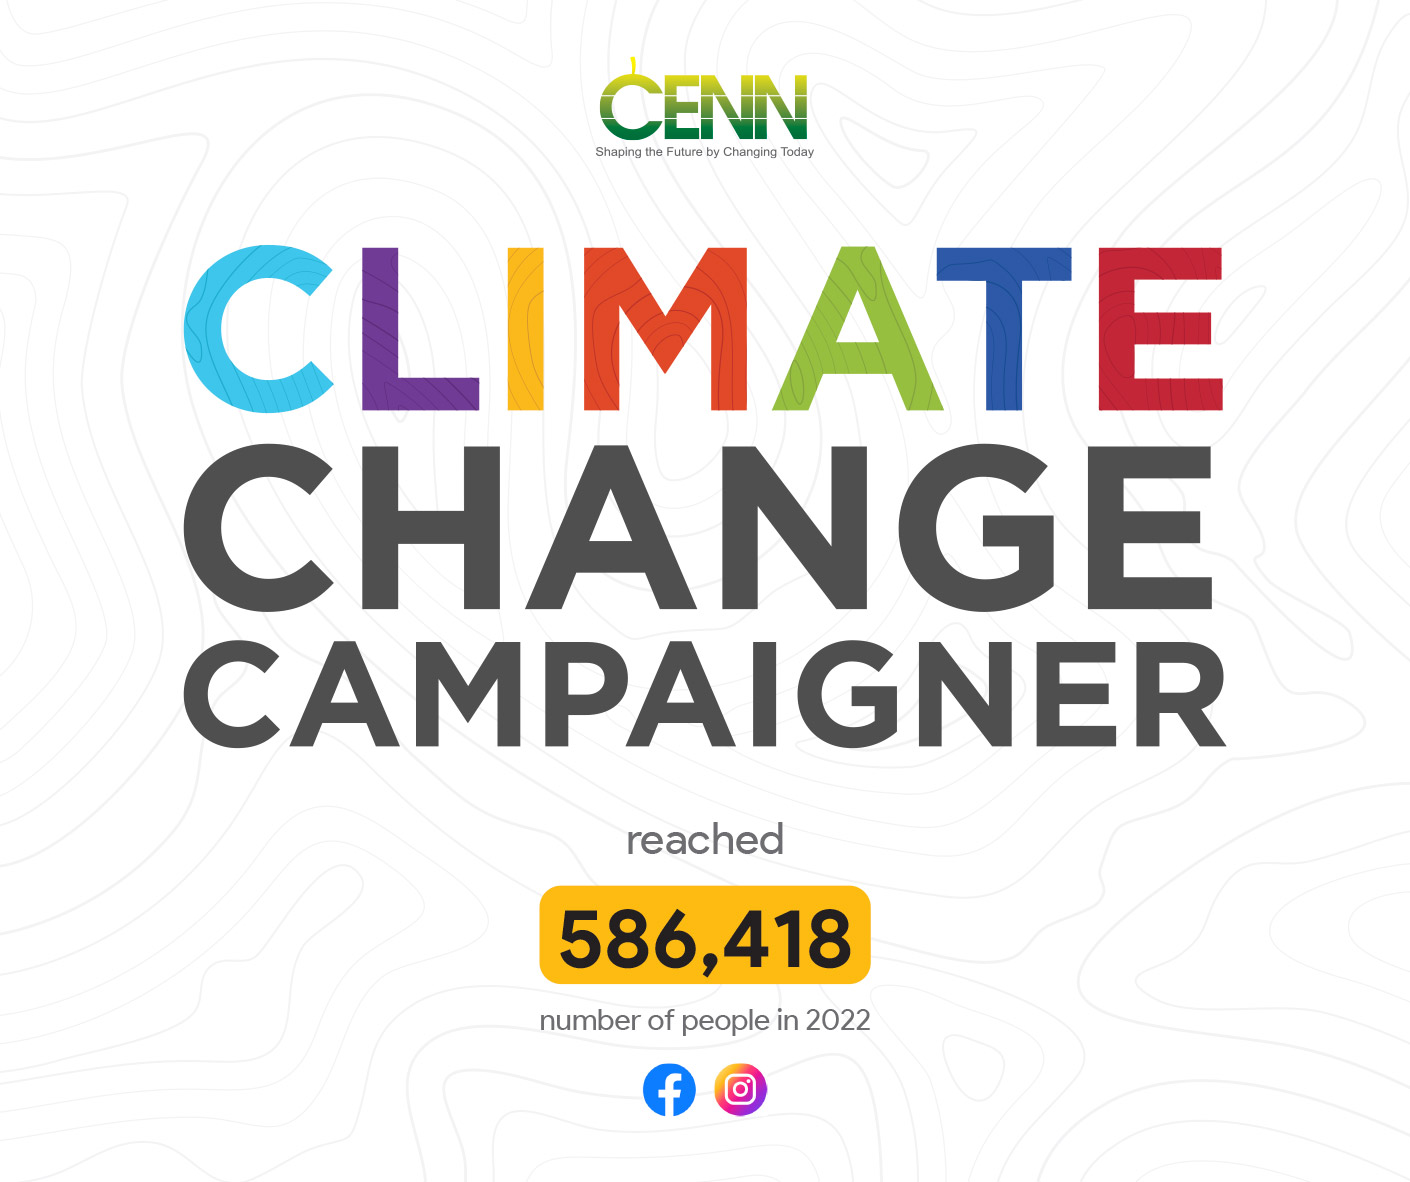 #ACT4CLIMATE Campaign Reached More Than Half a Million People